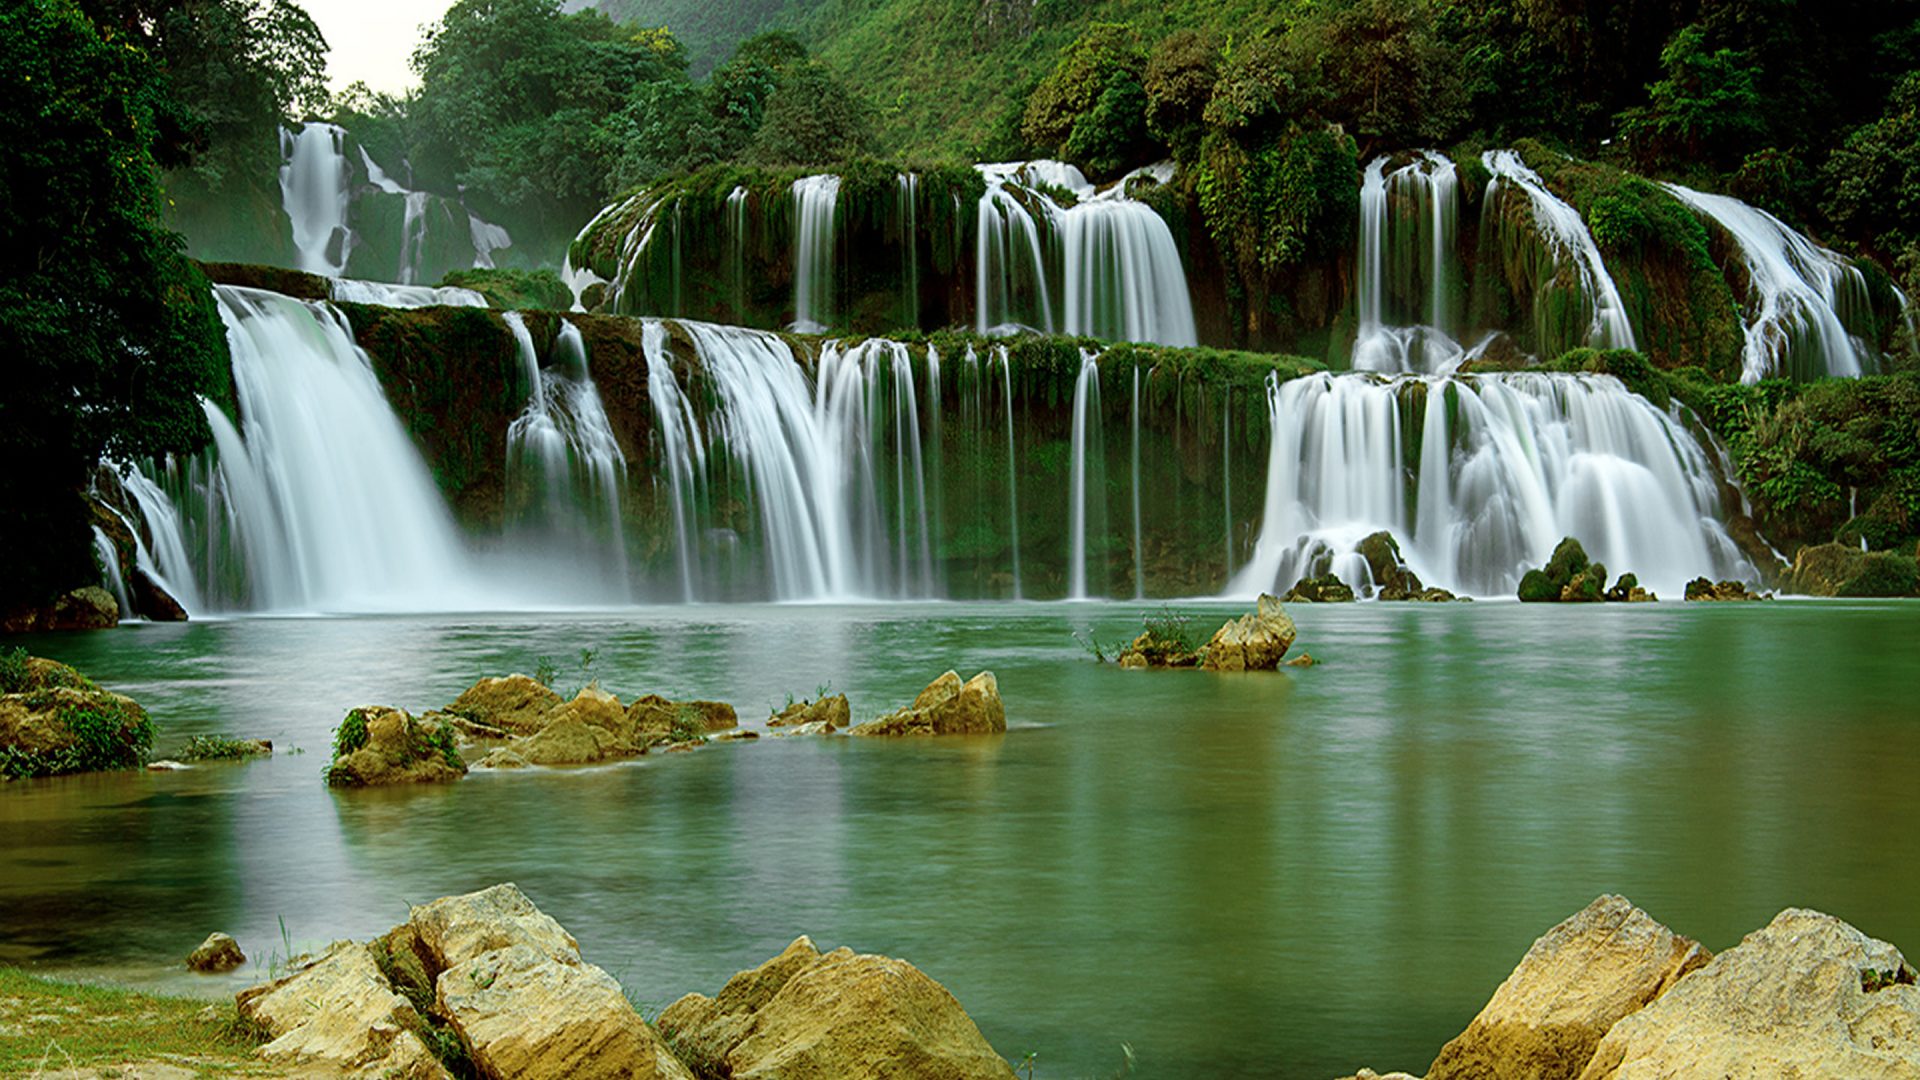 wallpaper computer full screen,waterfall,water resources,body of water,natural landscape,nature